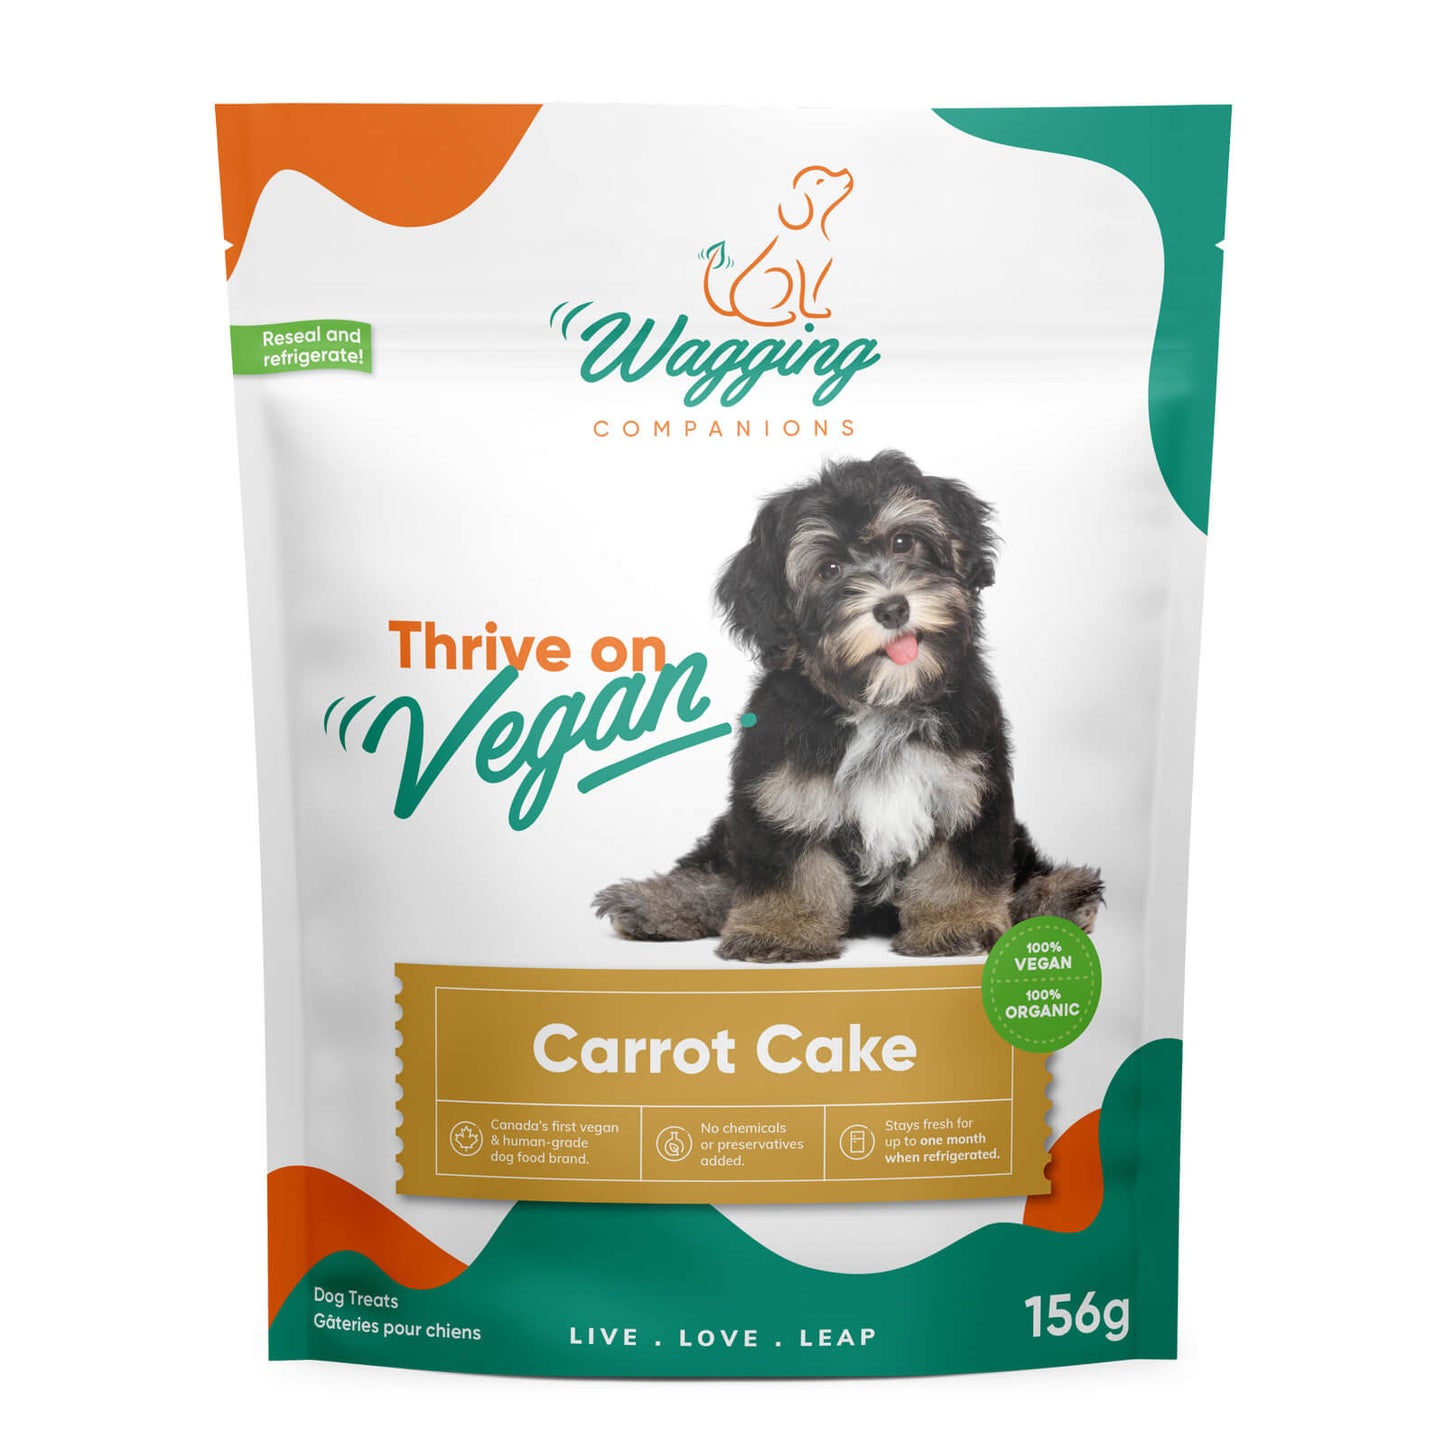 Front view of Wagging Companions' carrot cake dog treat packaging, presenting a single product. The package showcases the carrot cake variety, aligning with the brand's 'Thrive on Vegan' message, offering a delightful, plant-based option for pet owners seeking quality treats.